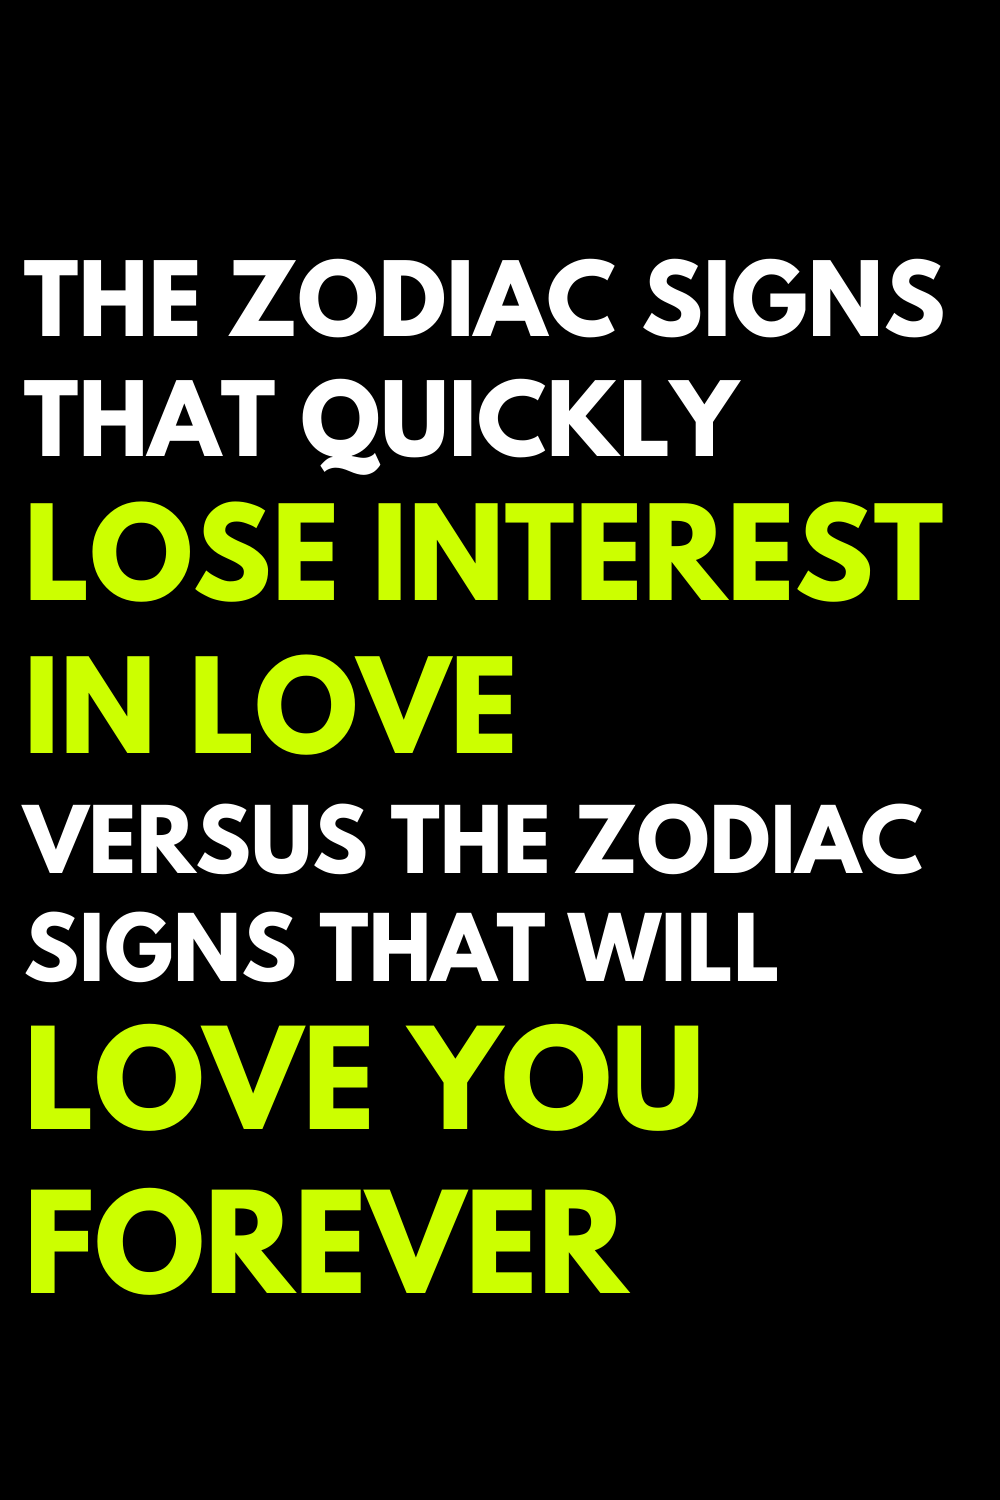 The zodiac signs that quickly lose interest in love versus the zodiac signs that will love you forever